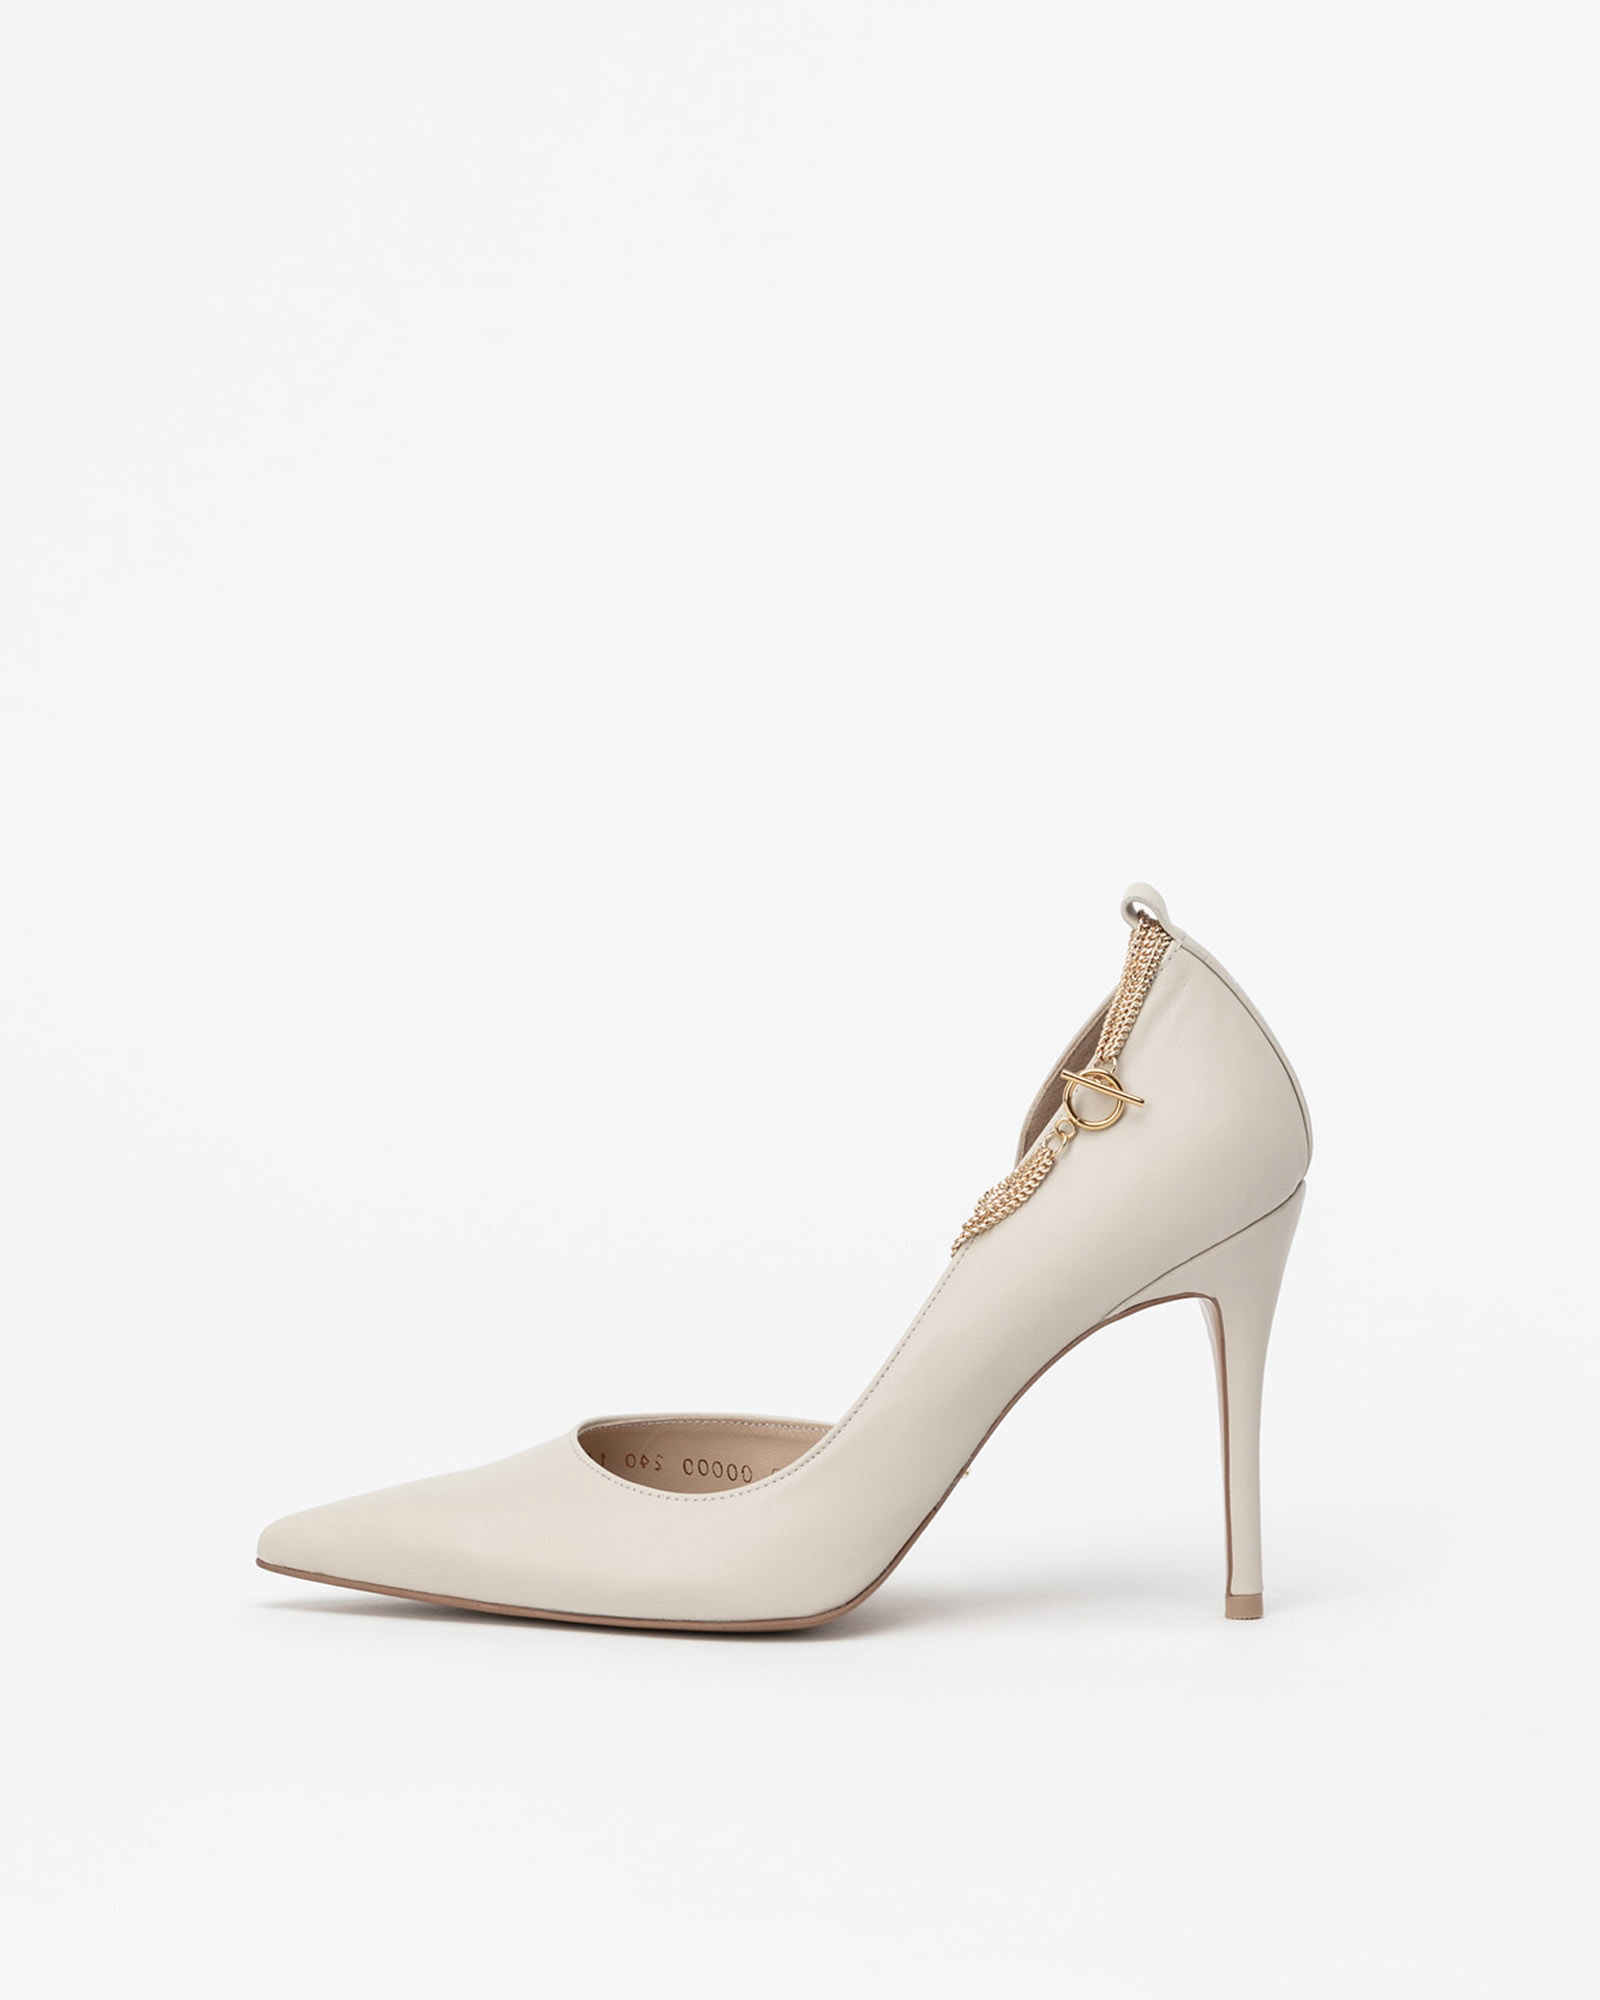 Cinque Chained Stiletto Pumps in Ivory